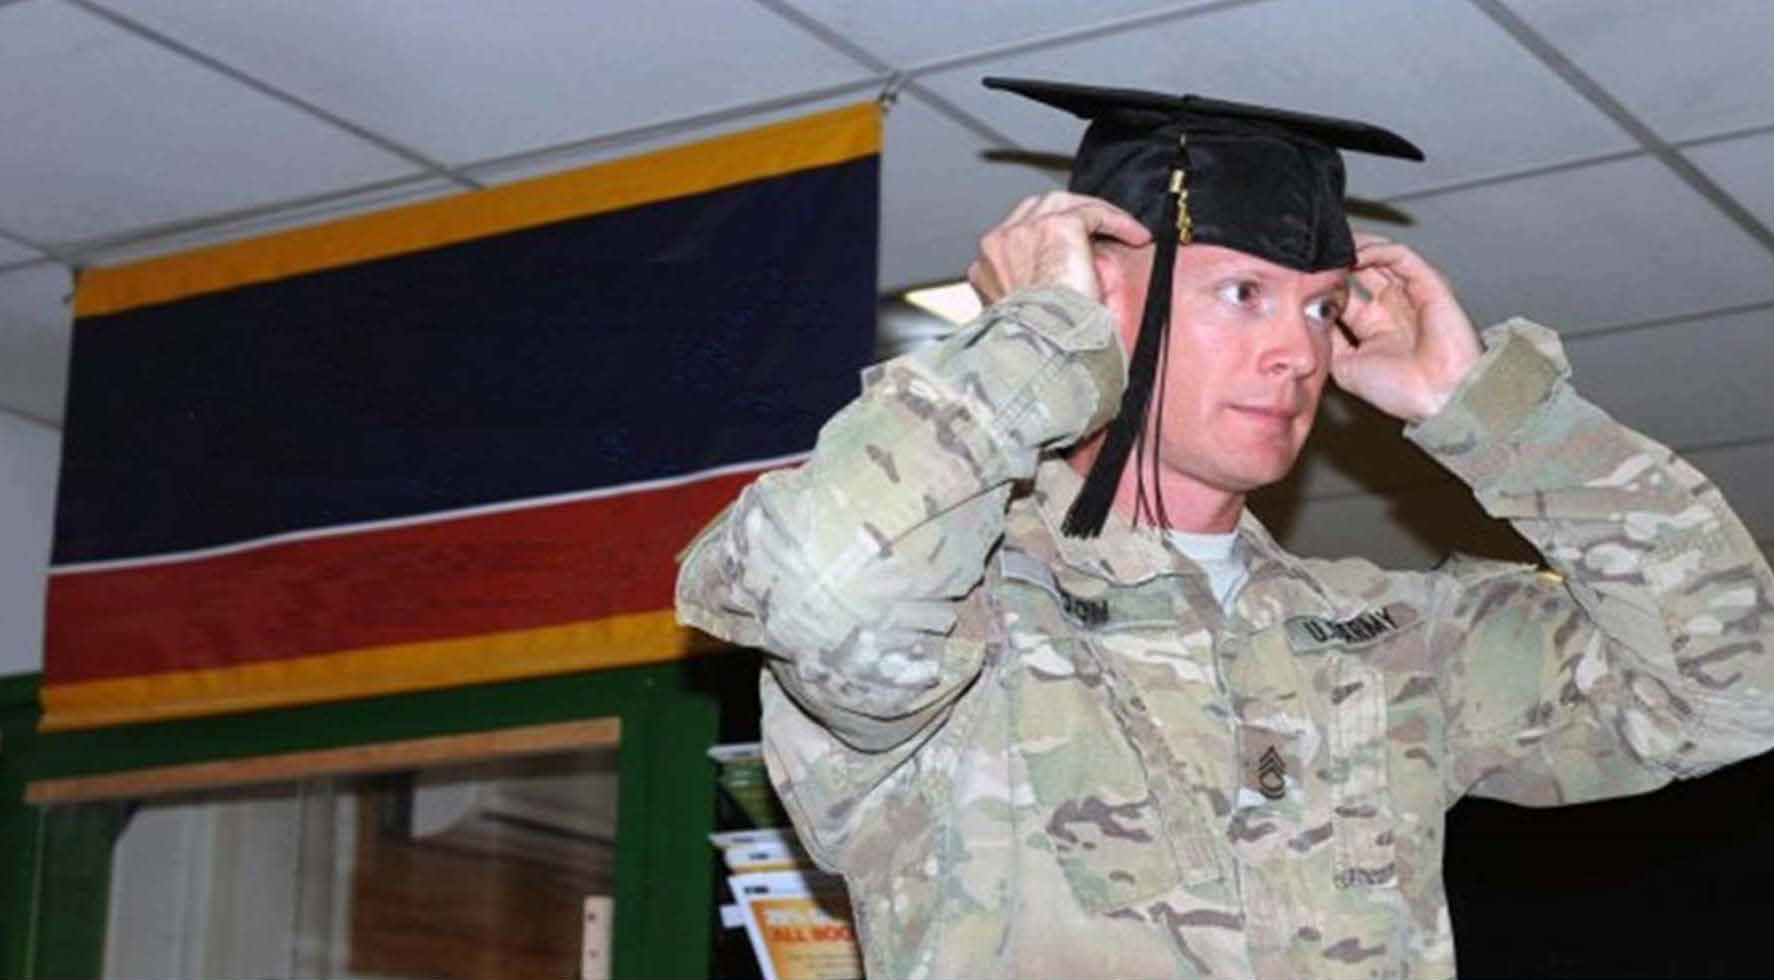 Twenty years after his high school graduation, SFC Joshua Moon, an Army reservist from Beech Grove, Tennessee, graduated with an associate of science degree from Motlow State Community College. Deployed to Afghanistan in support of Operation Enduring Freedom, Moon was able to complete his degree with help from the Army's Tuition Assistance program and the handful of education counselors currently deployed to Afghanistan to support soldiers' educational needs.